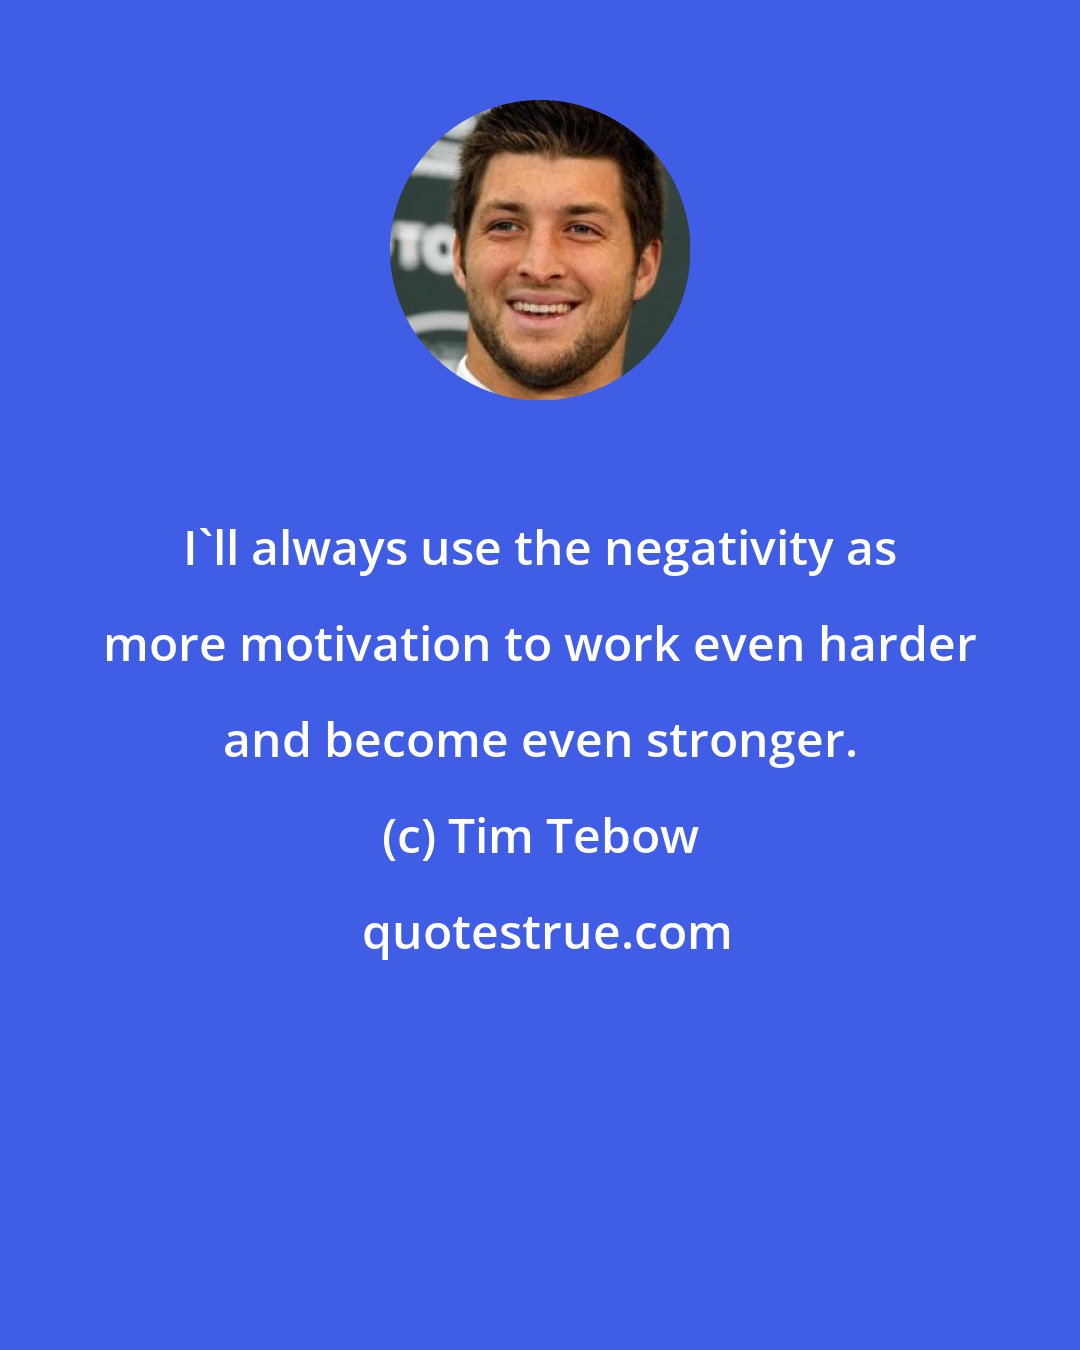 Tim Tebow: I'll always use the negativity as more motivation to work even harder and become even stronger.